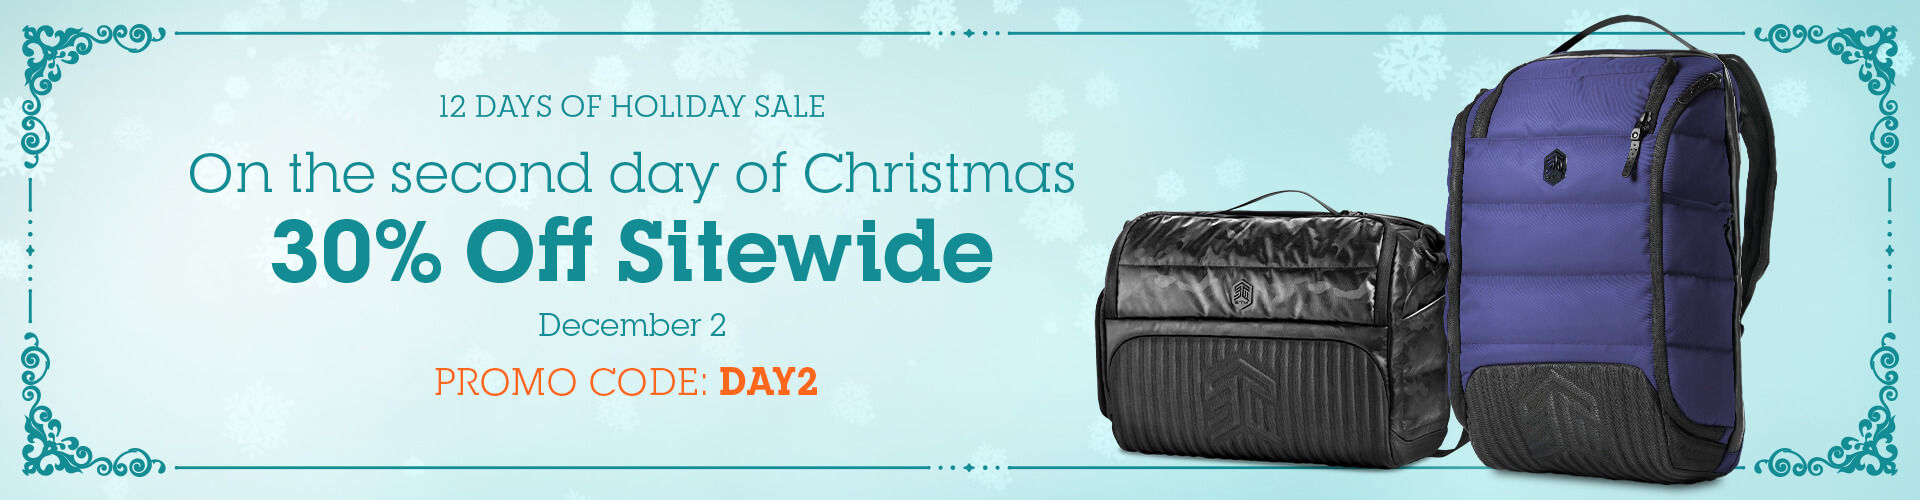 12 Days of Christmas | Day 2 | 30% Off Sitewide